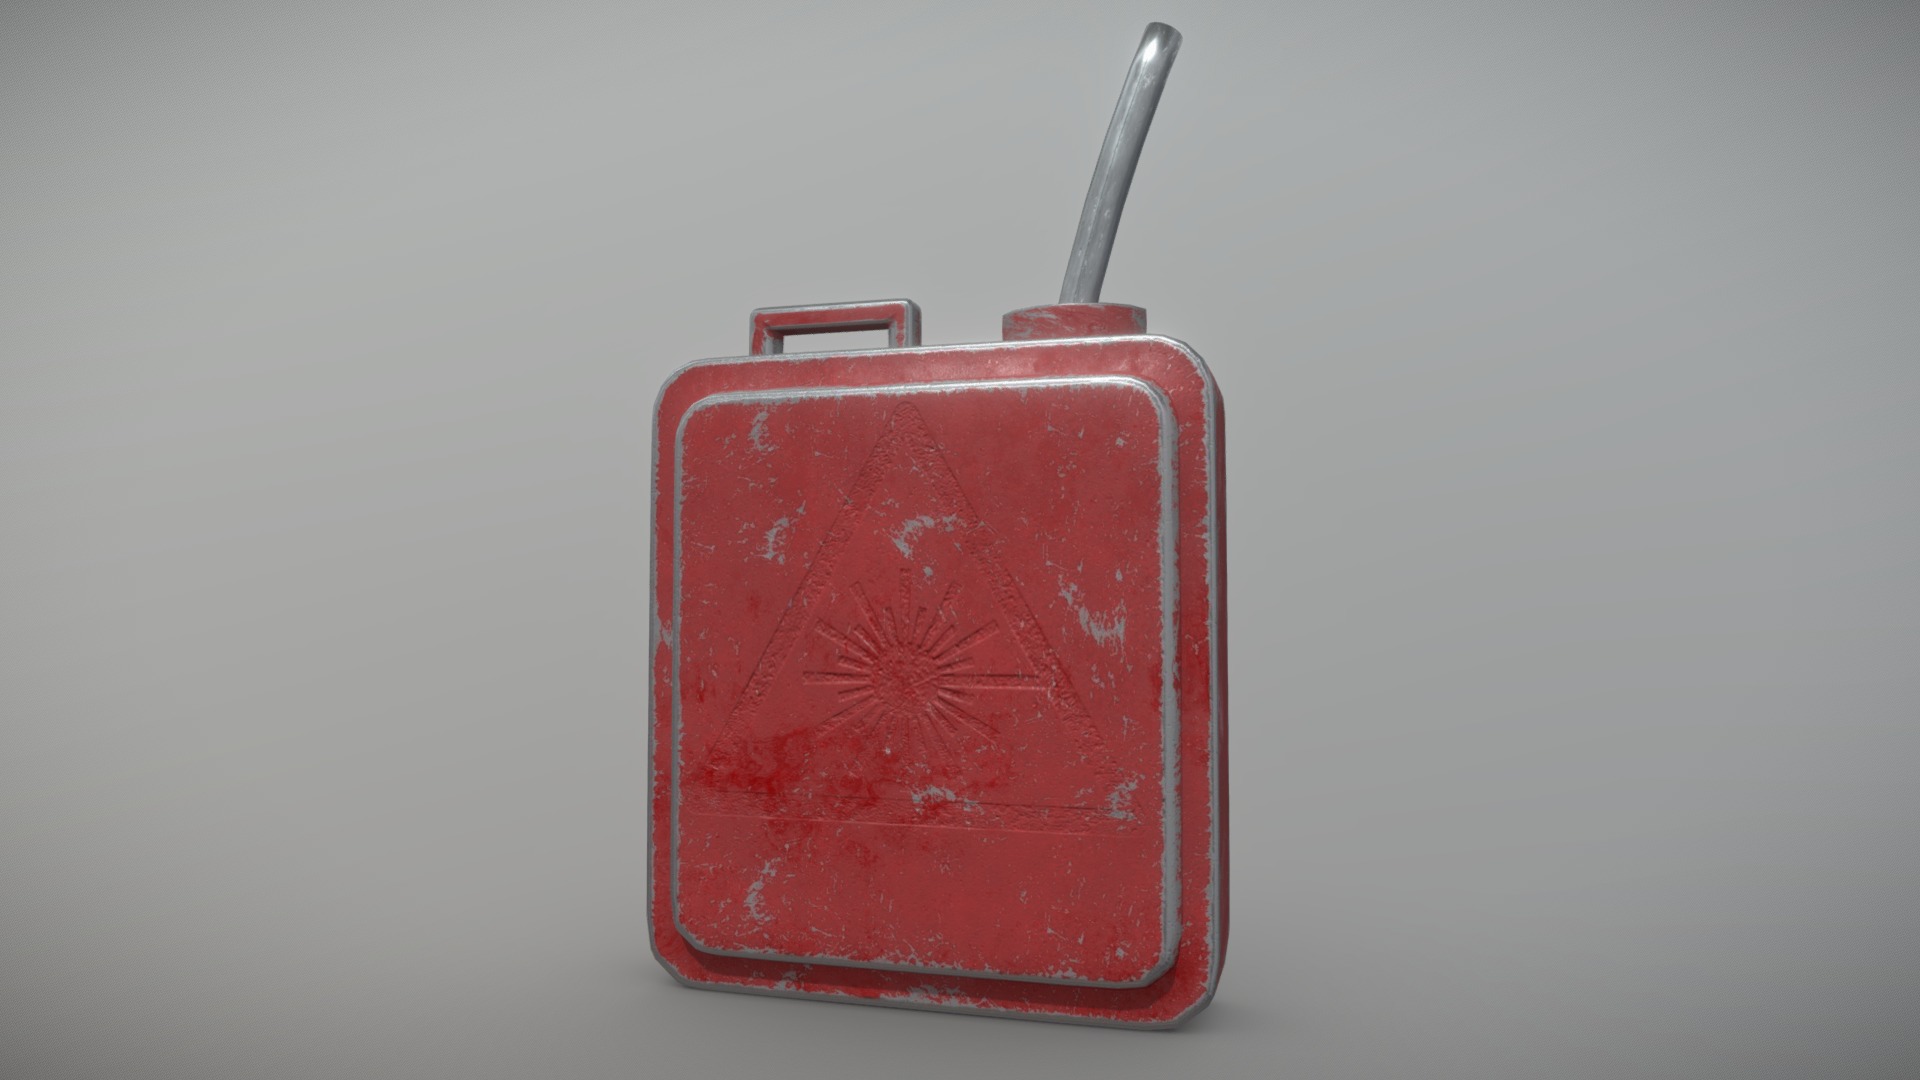 3D model Gas_Can_PUBG_STYLE - This is a 3D model of the Gas_Can_PUBG_STYLE. The 3D model is about a red lighter with a metal handle.